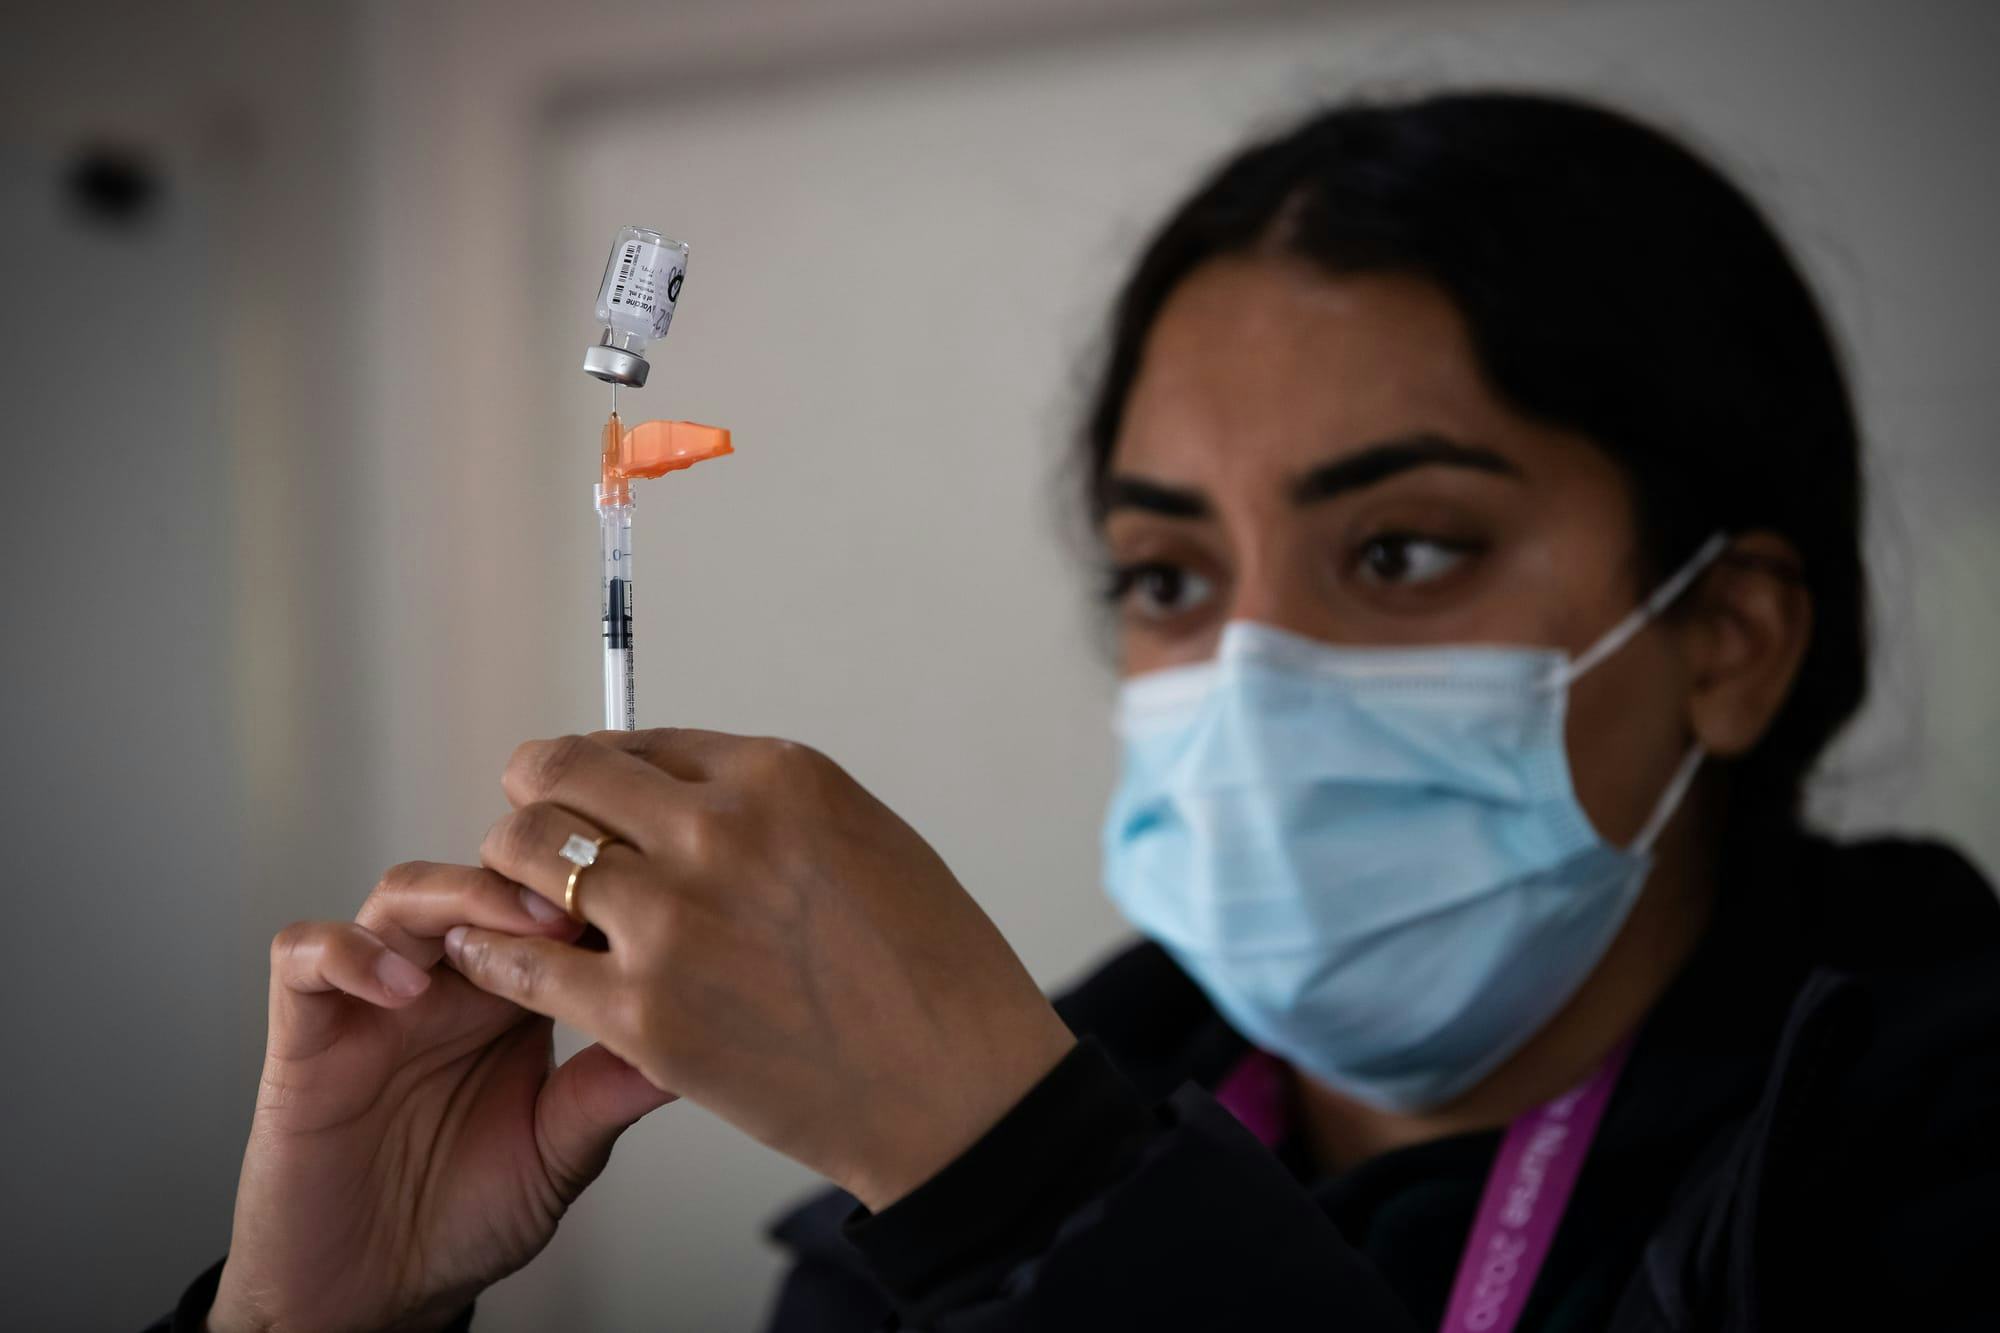 A nurse, wearing a mask, pulls a dose of a COVID-19 vaccine into a syringe.